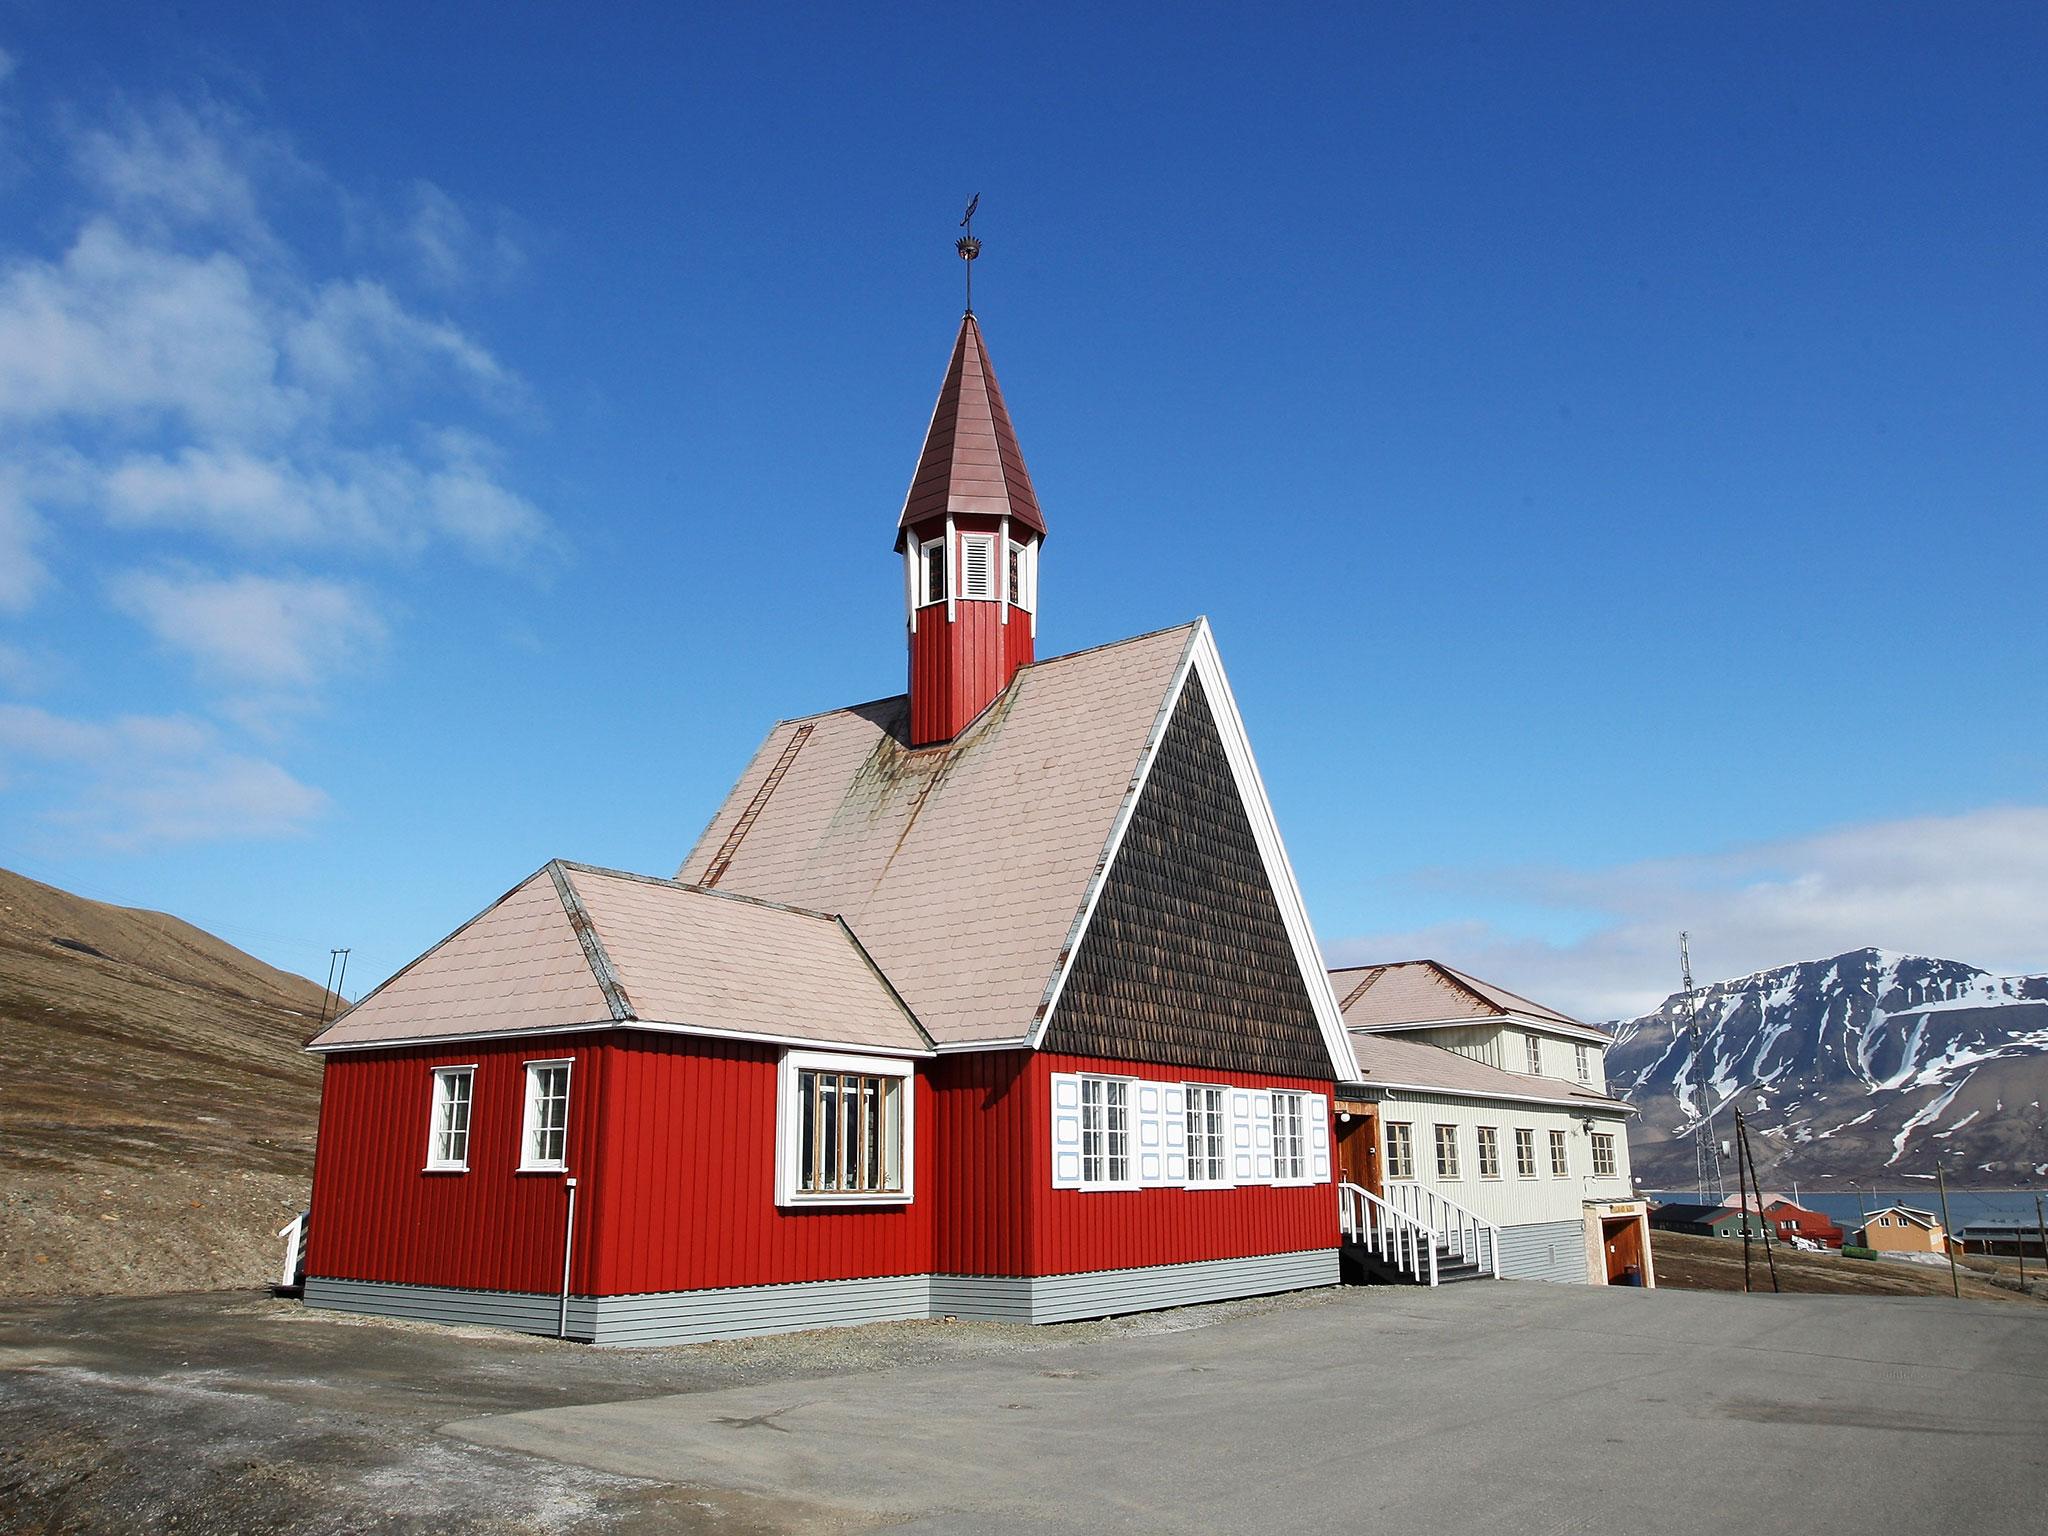 The worlds's northernmost church stands overlooking the town of Longyearbyen in Longyearbyen, Norway